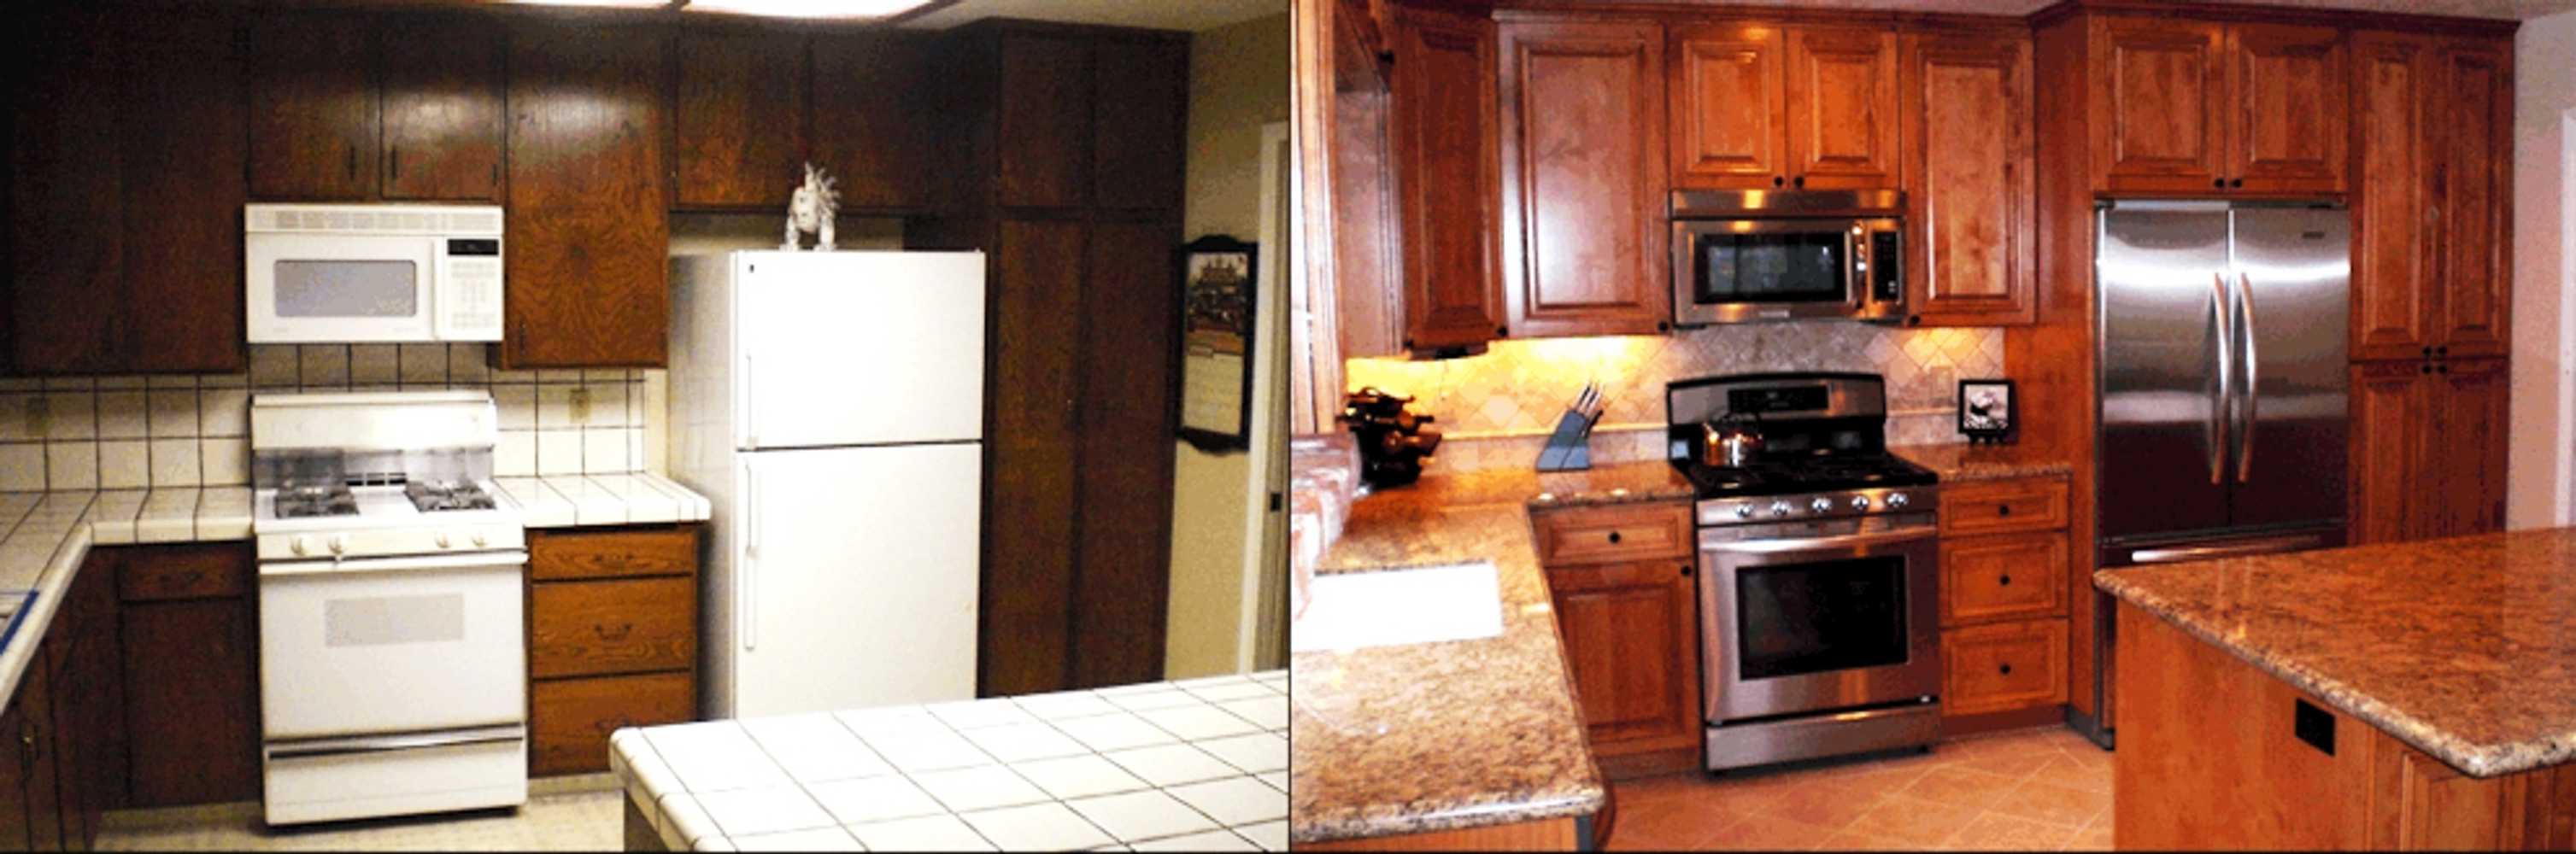 Kitchen before and after remodeling